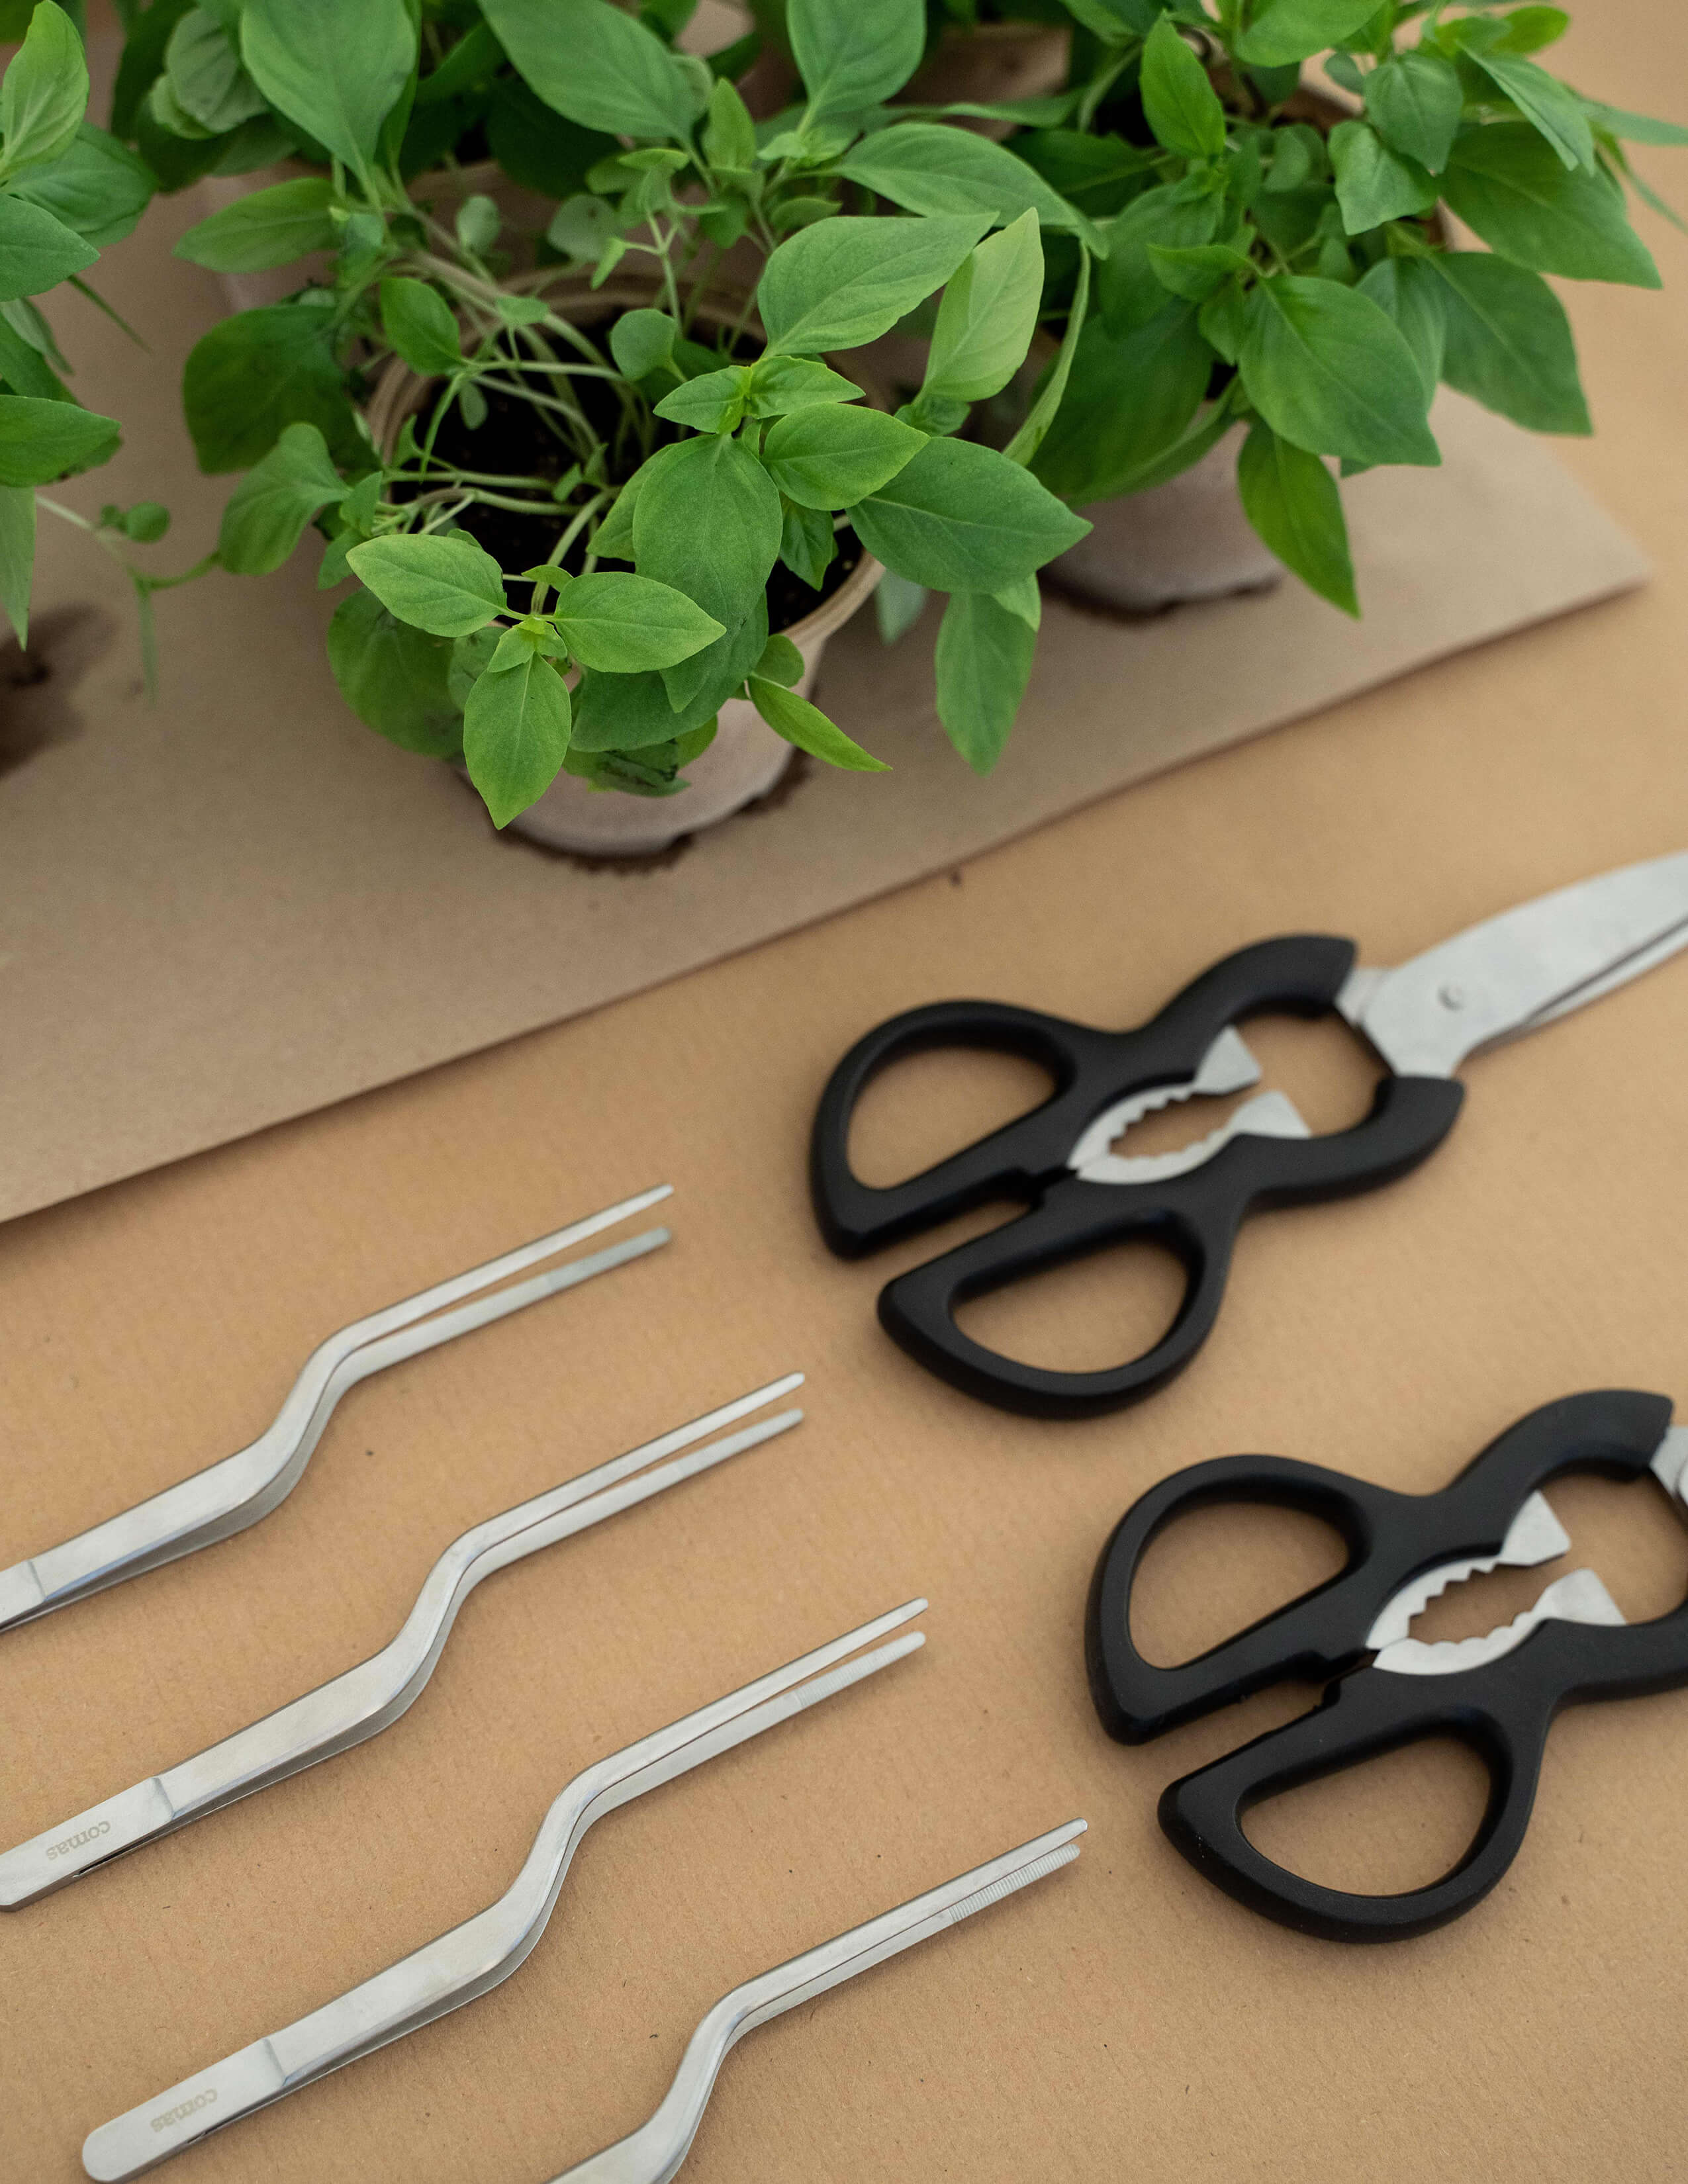 4 stainless long tweezers, kitchen shears with many pots of herbs on the table.